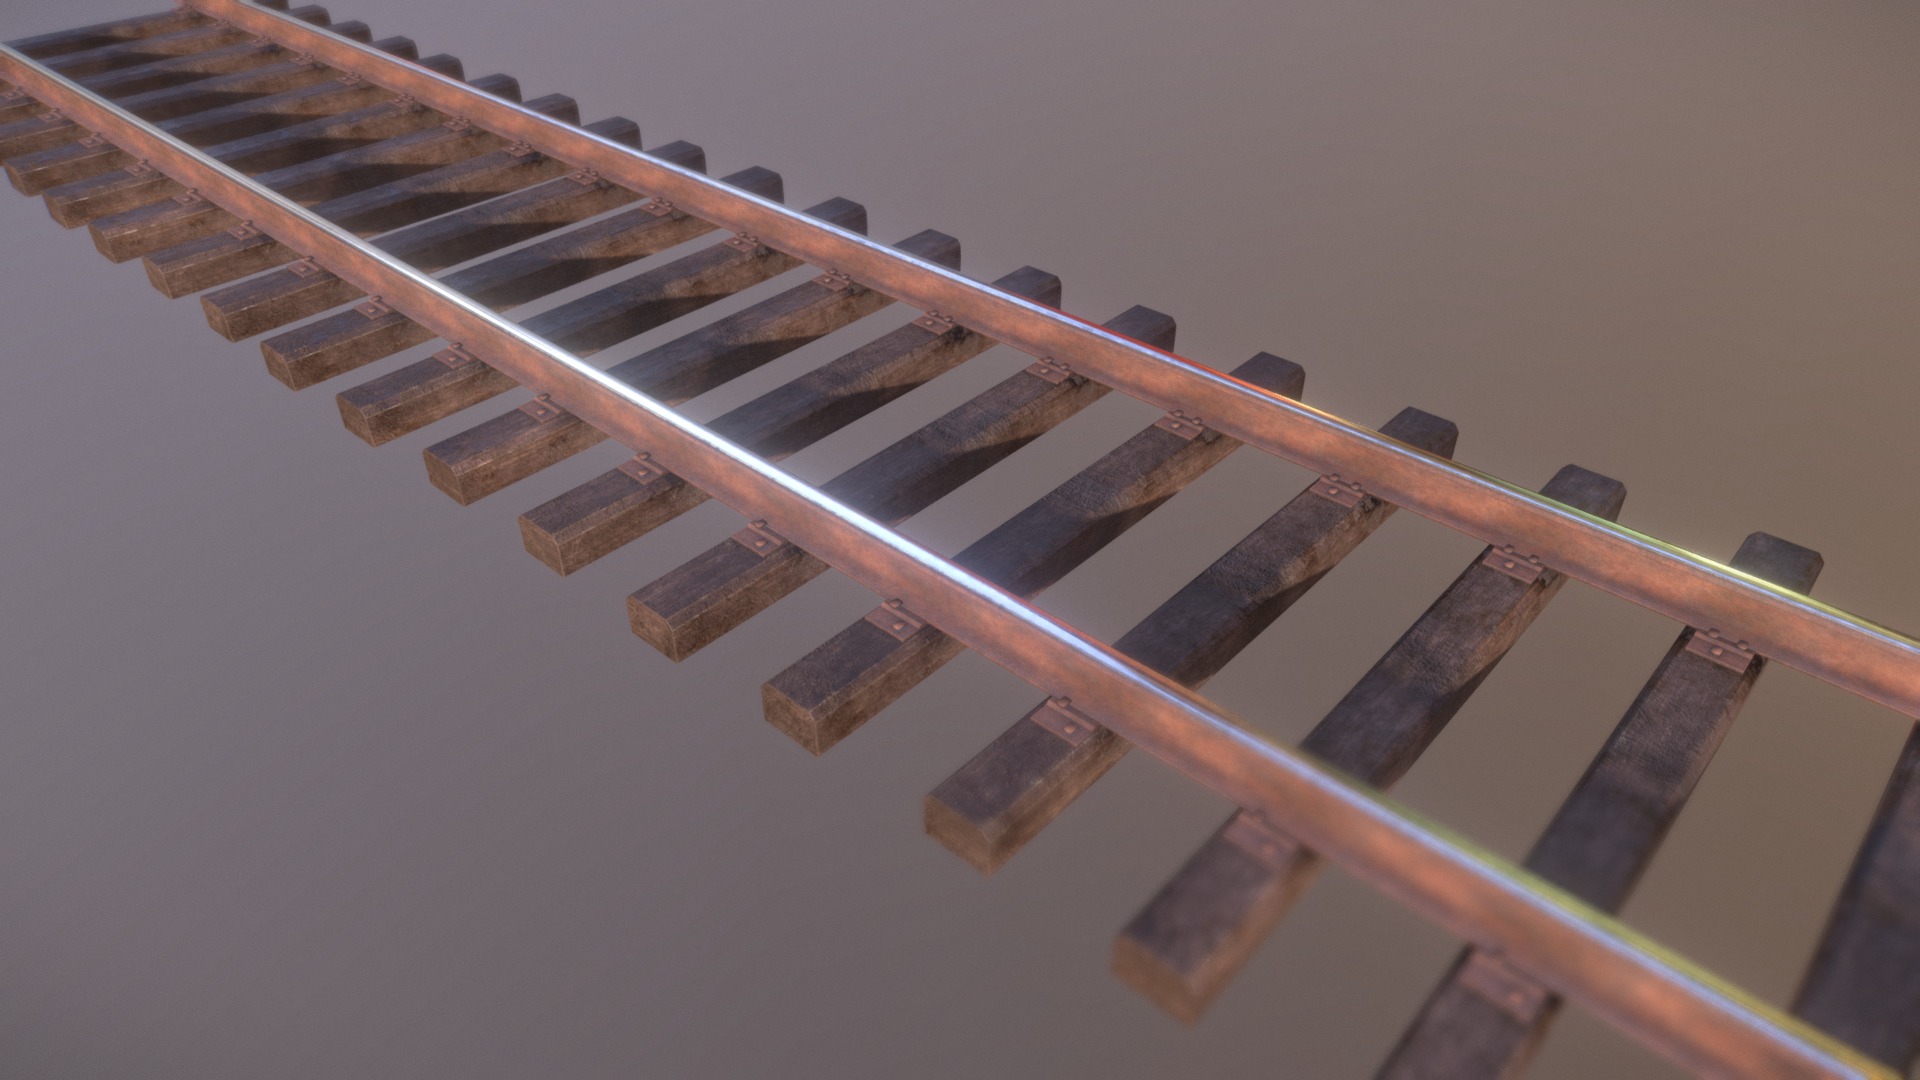 3D model Railway Track R65 12.5m - This is a 3D model of the Railway Track R65 12.5m. The 3D model is about a wooden structure with a metal frame.